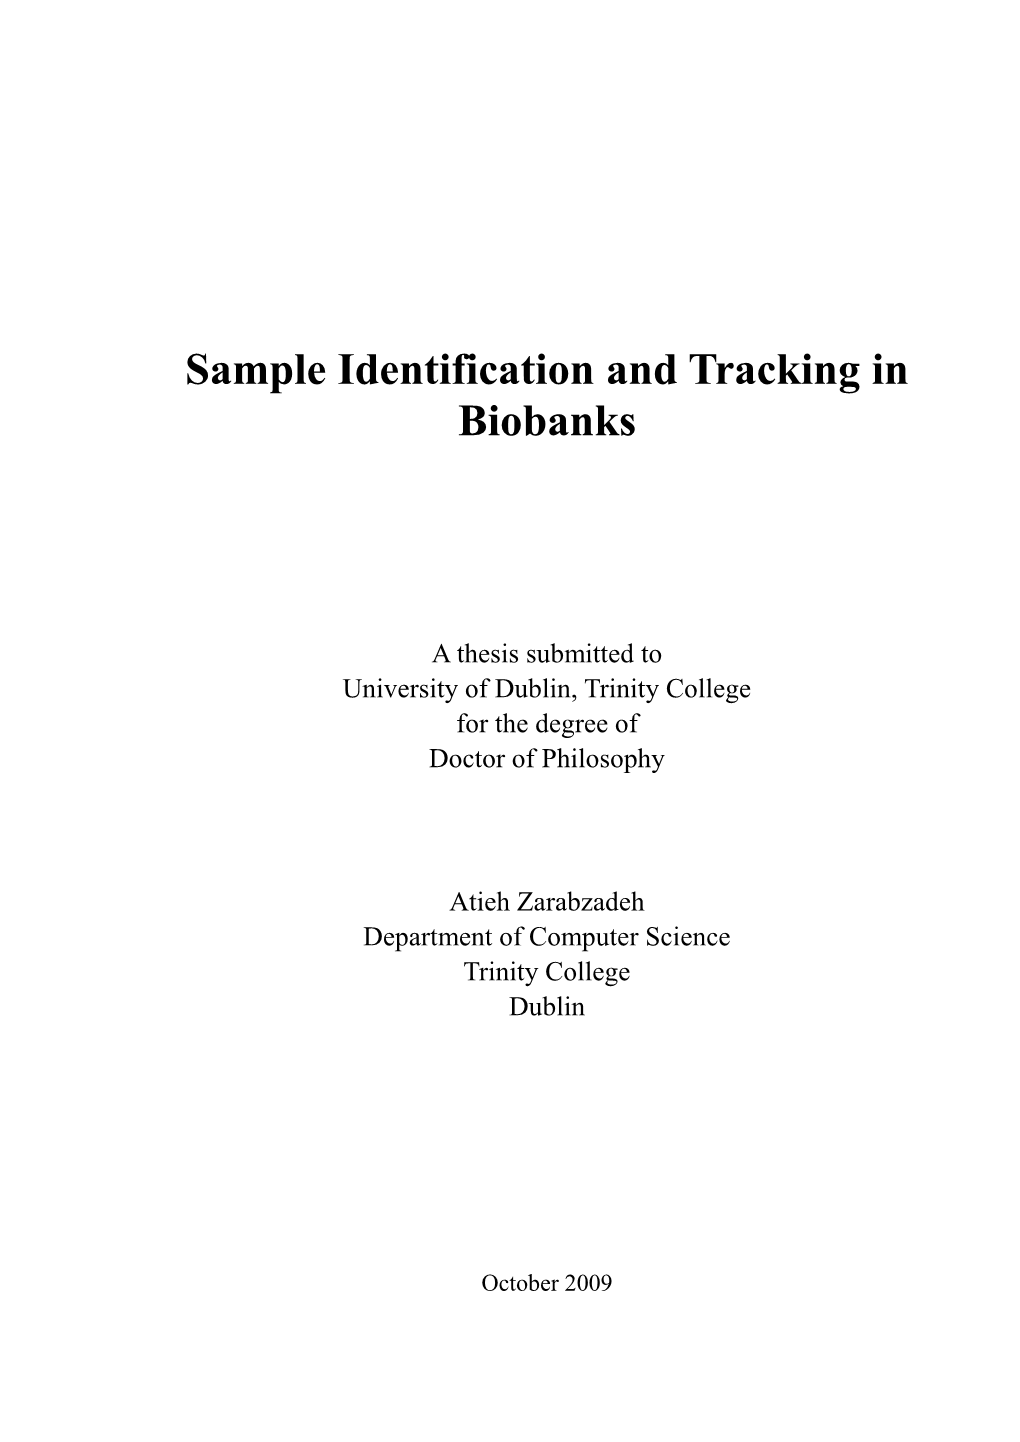 Sample Identification and Tracking in Biobanks